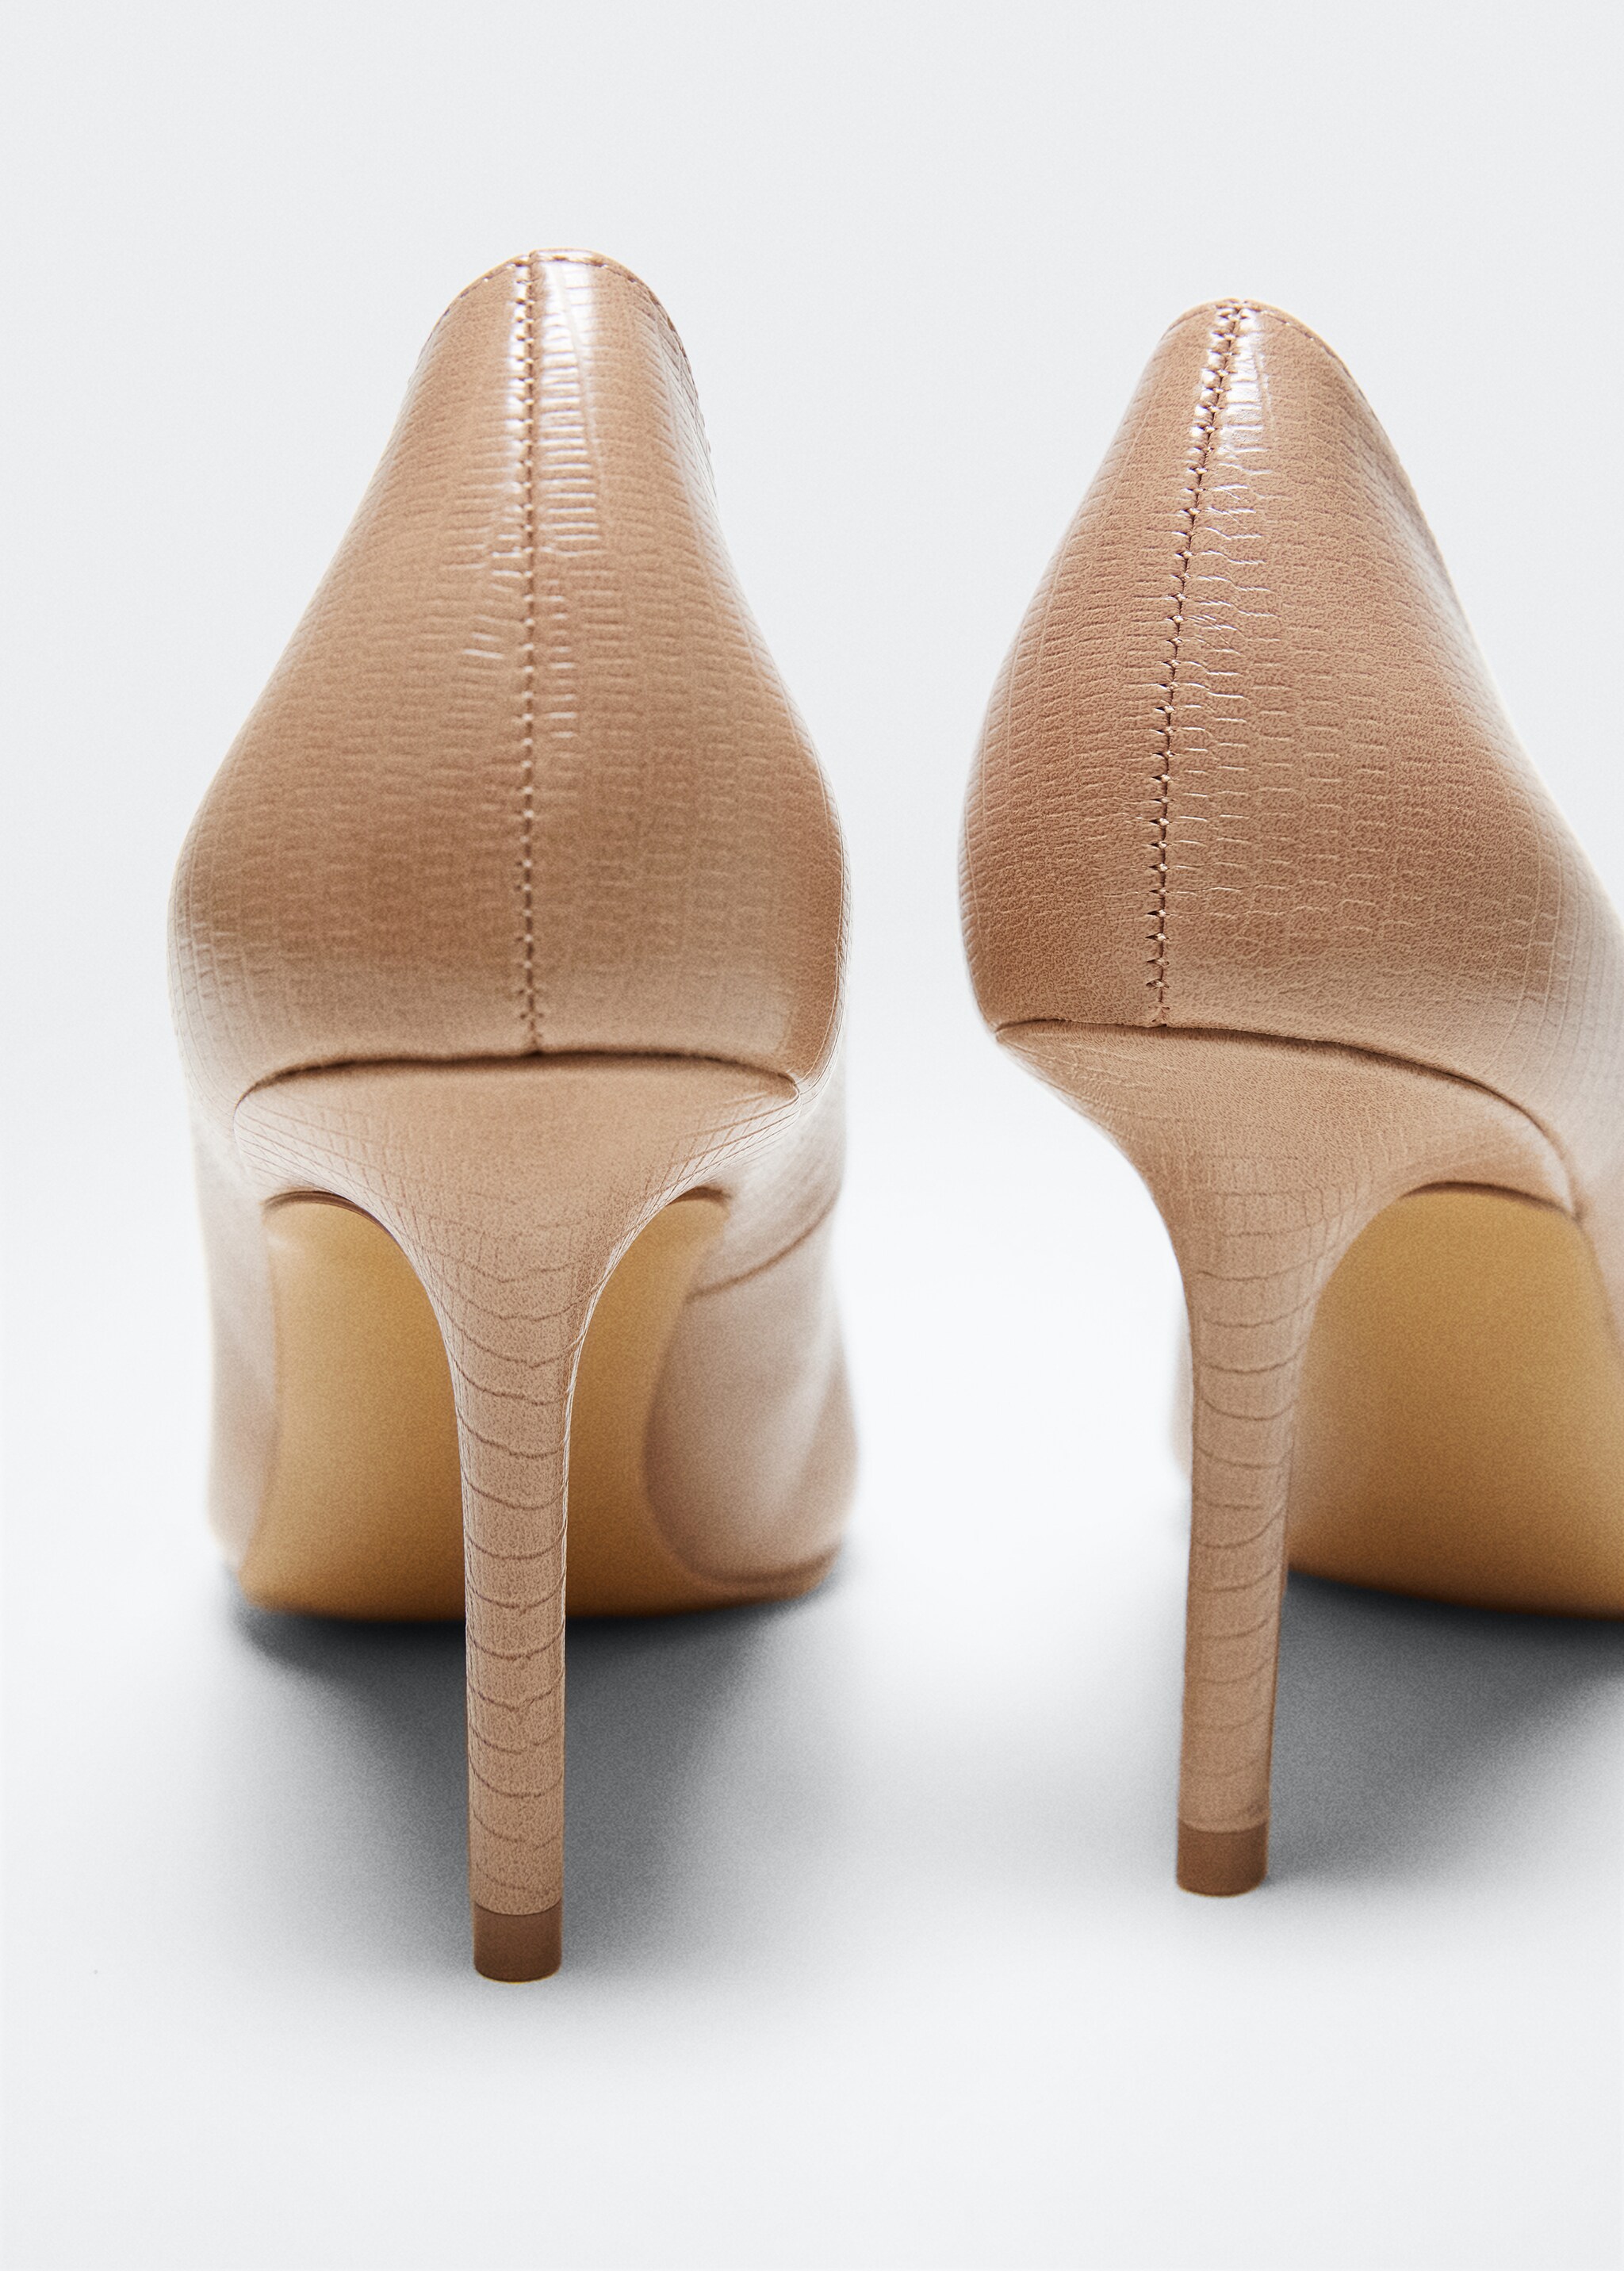 Pointed toe pumps - Details of the article 3